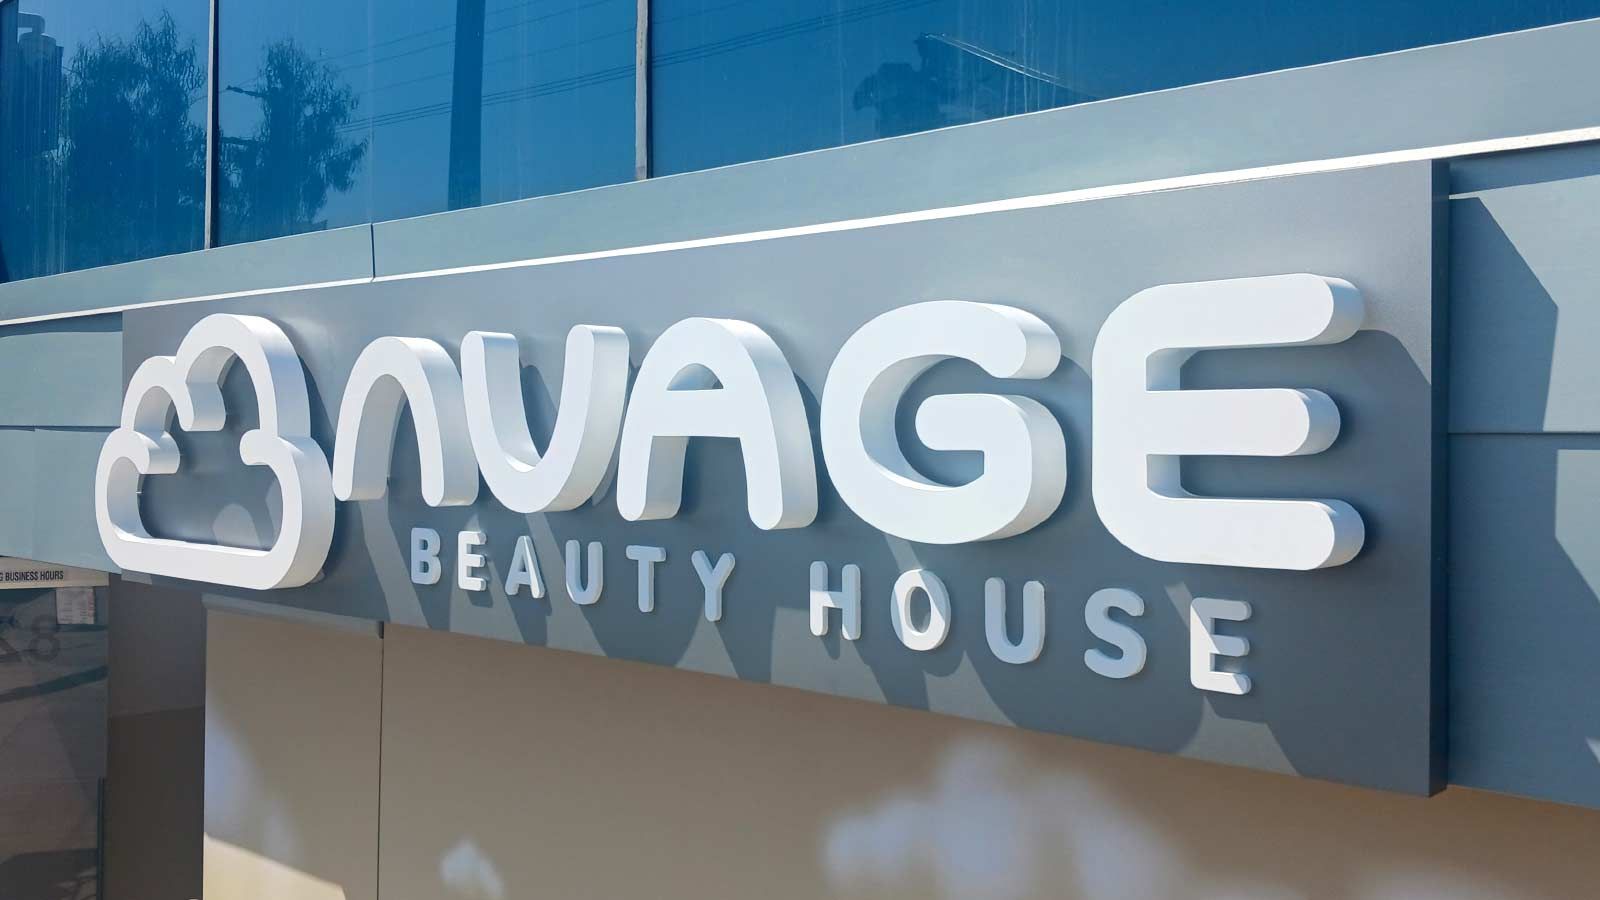 Nuage Beauty House reverse channel letters on the building